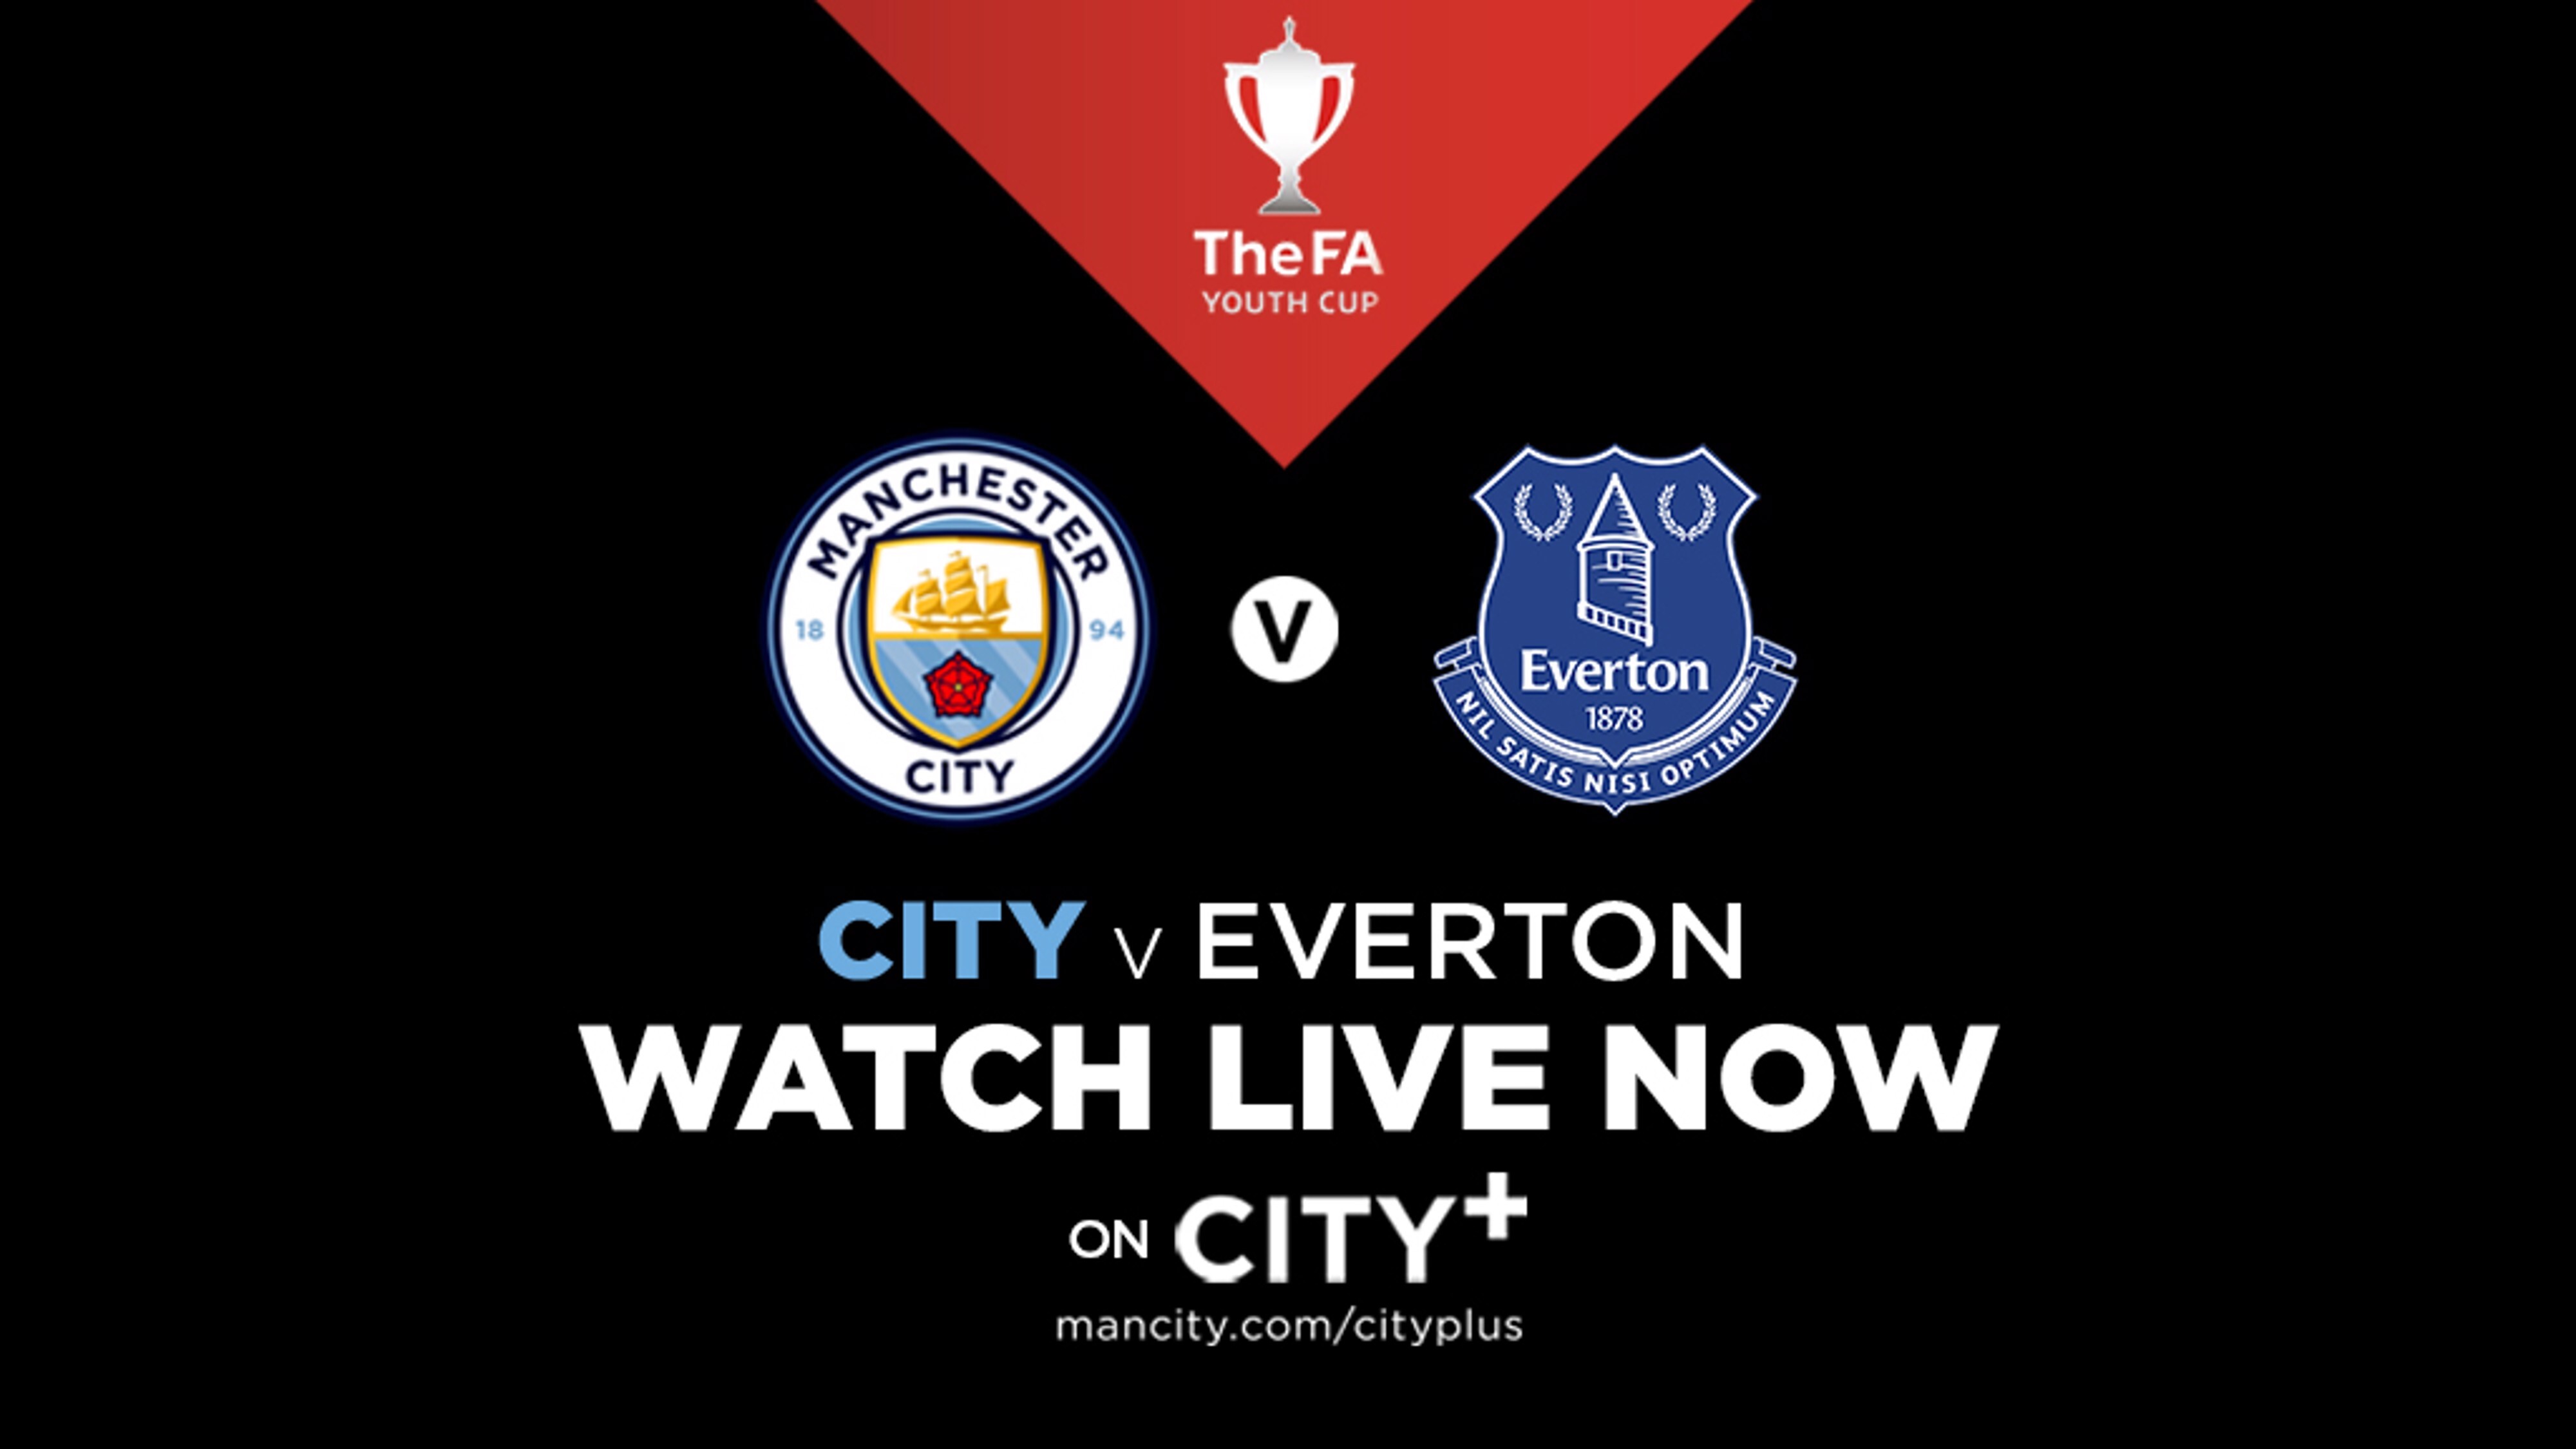 Watch City Under-18s in FA Youth Cup action live on CITY+